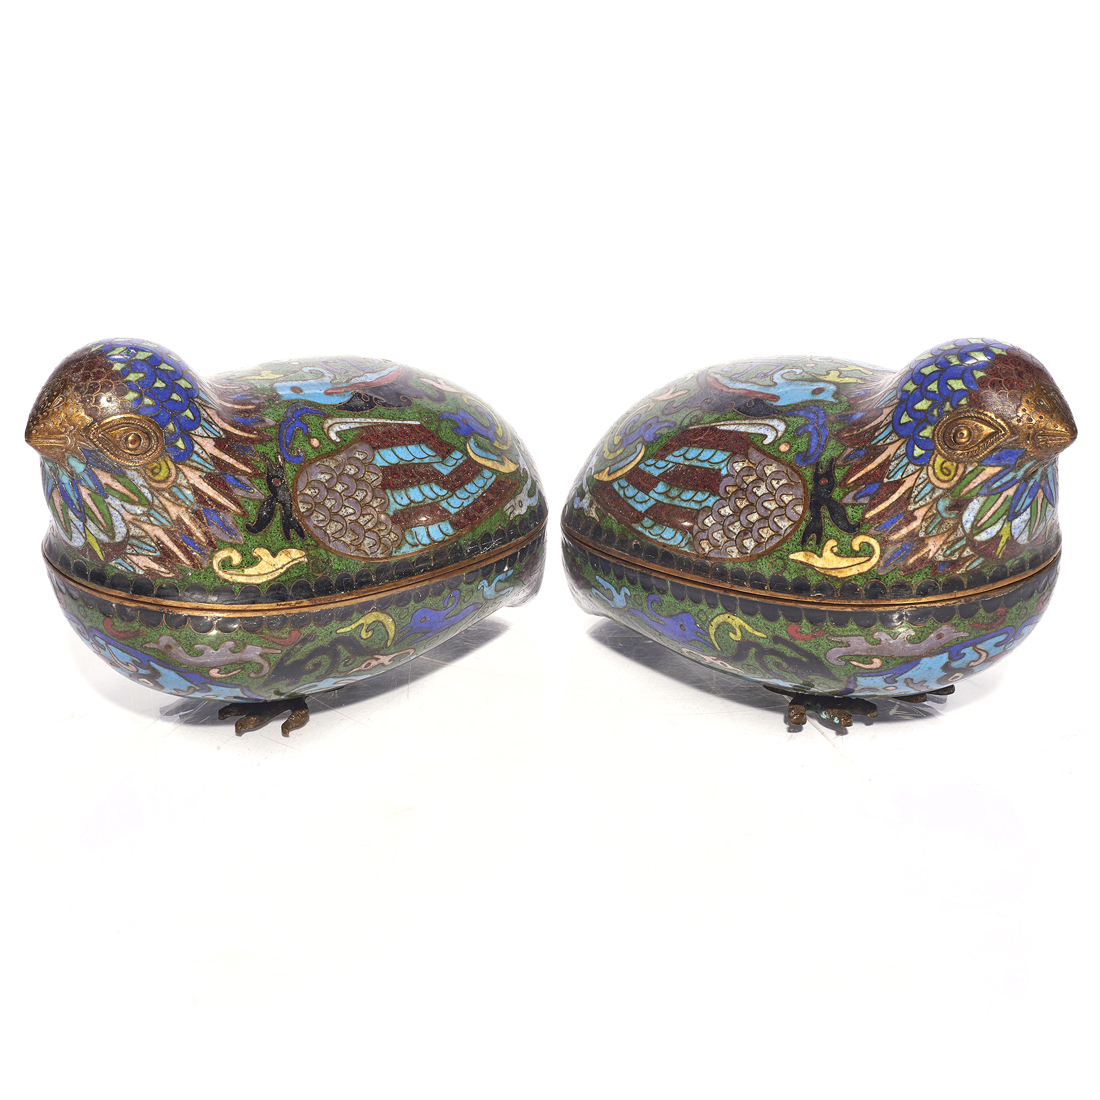 PAIR OF CHINESE CLOISONNE ENAMEL 2d311f